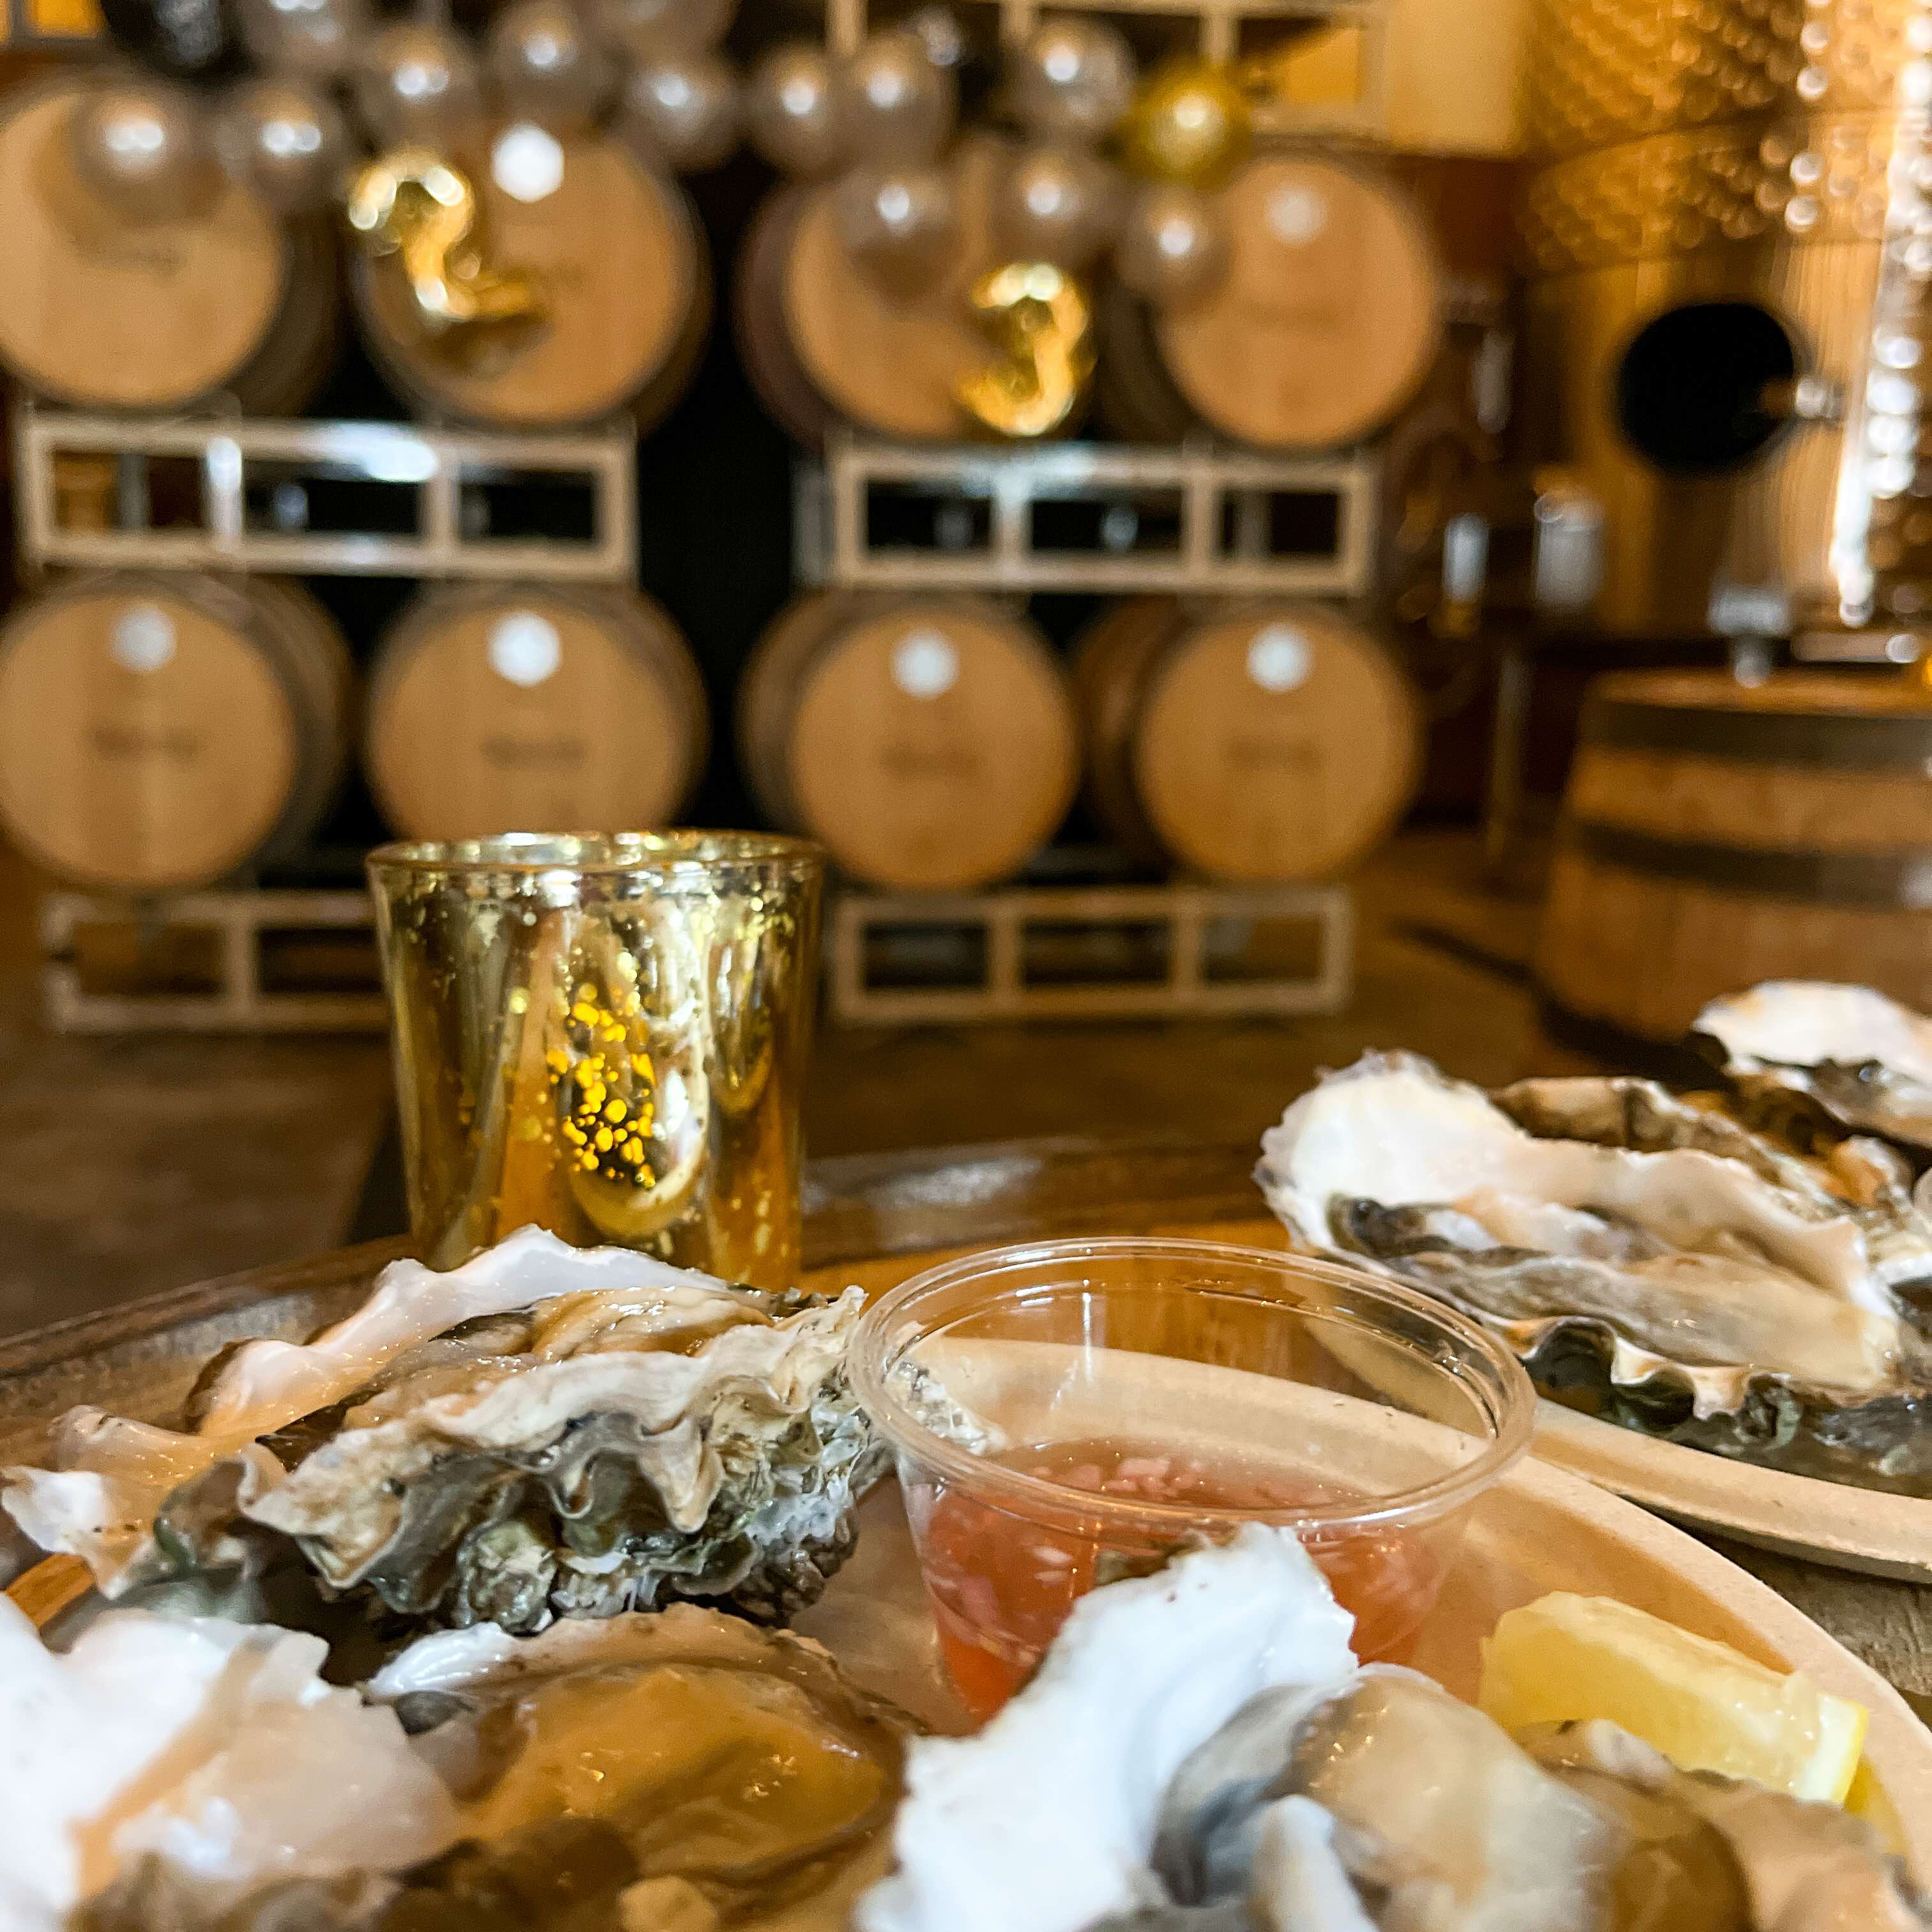 Celebrate New Year's Eve at Alesong Brewing & Blending with oysters. (image courtesy of Alesong Brewing & Blending)